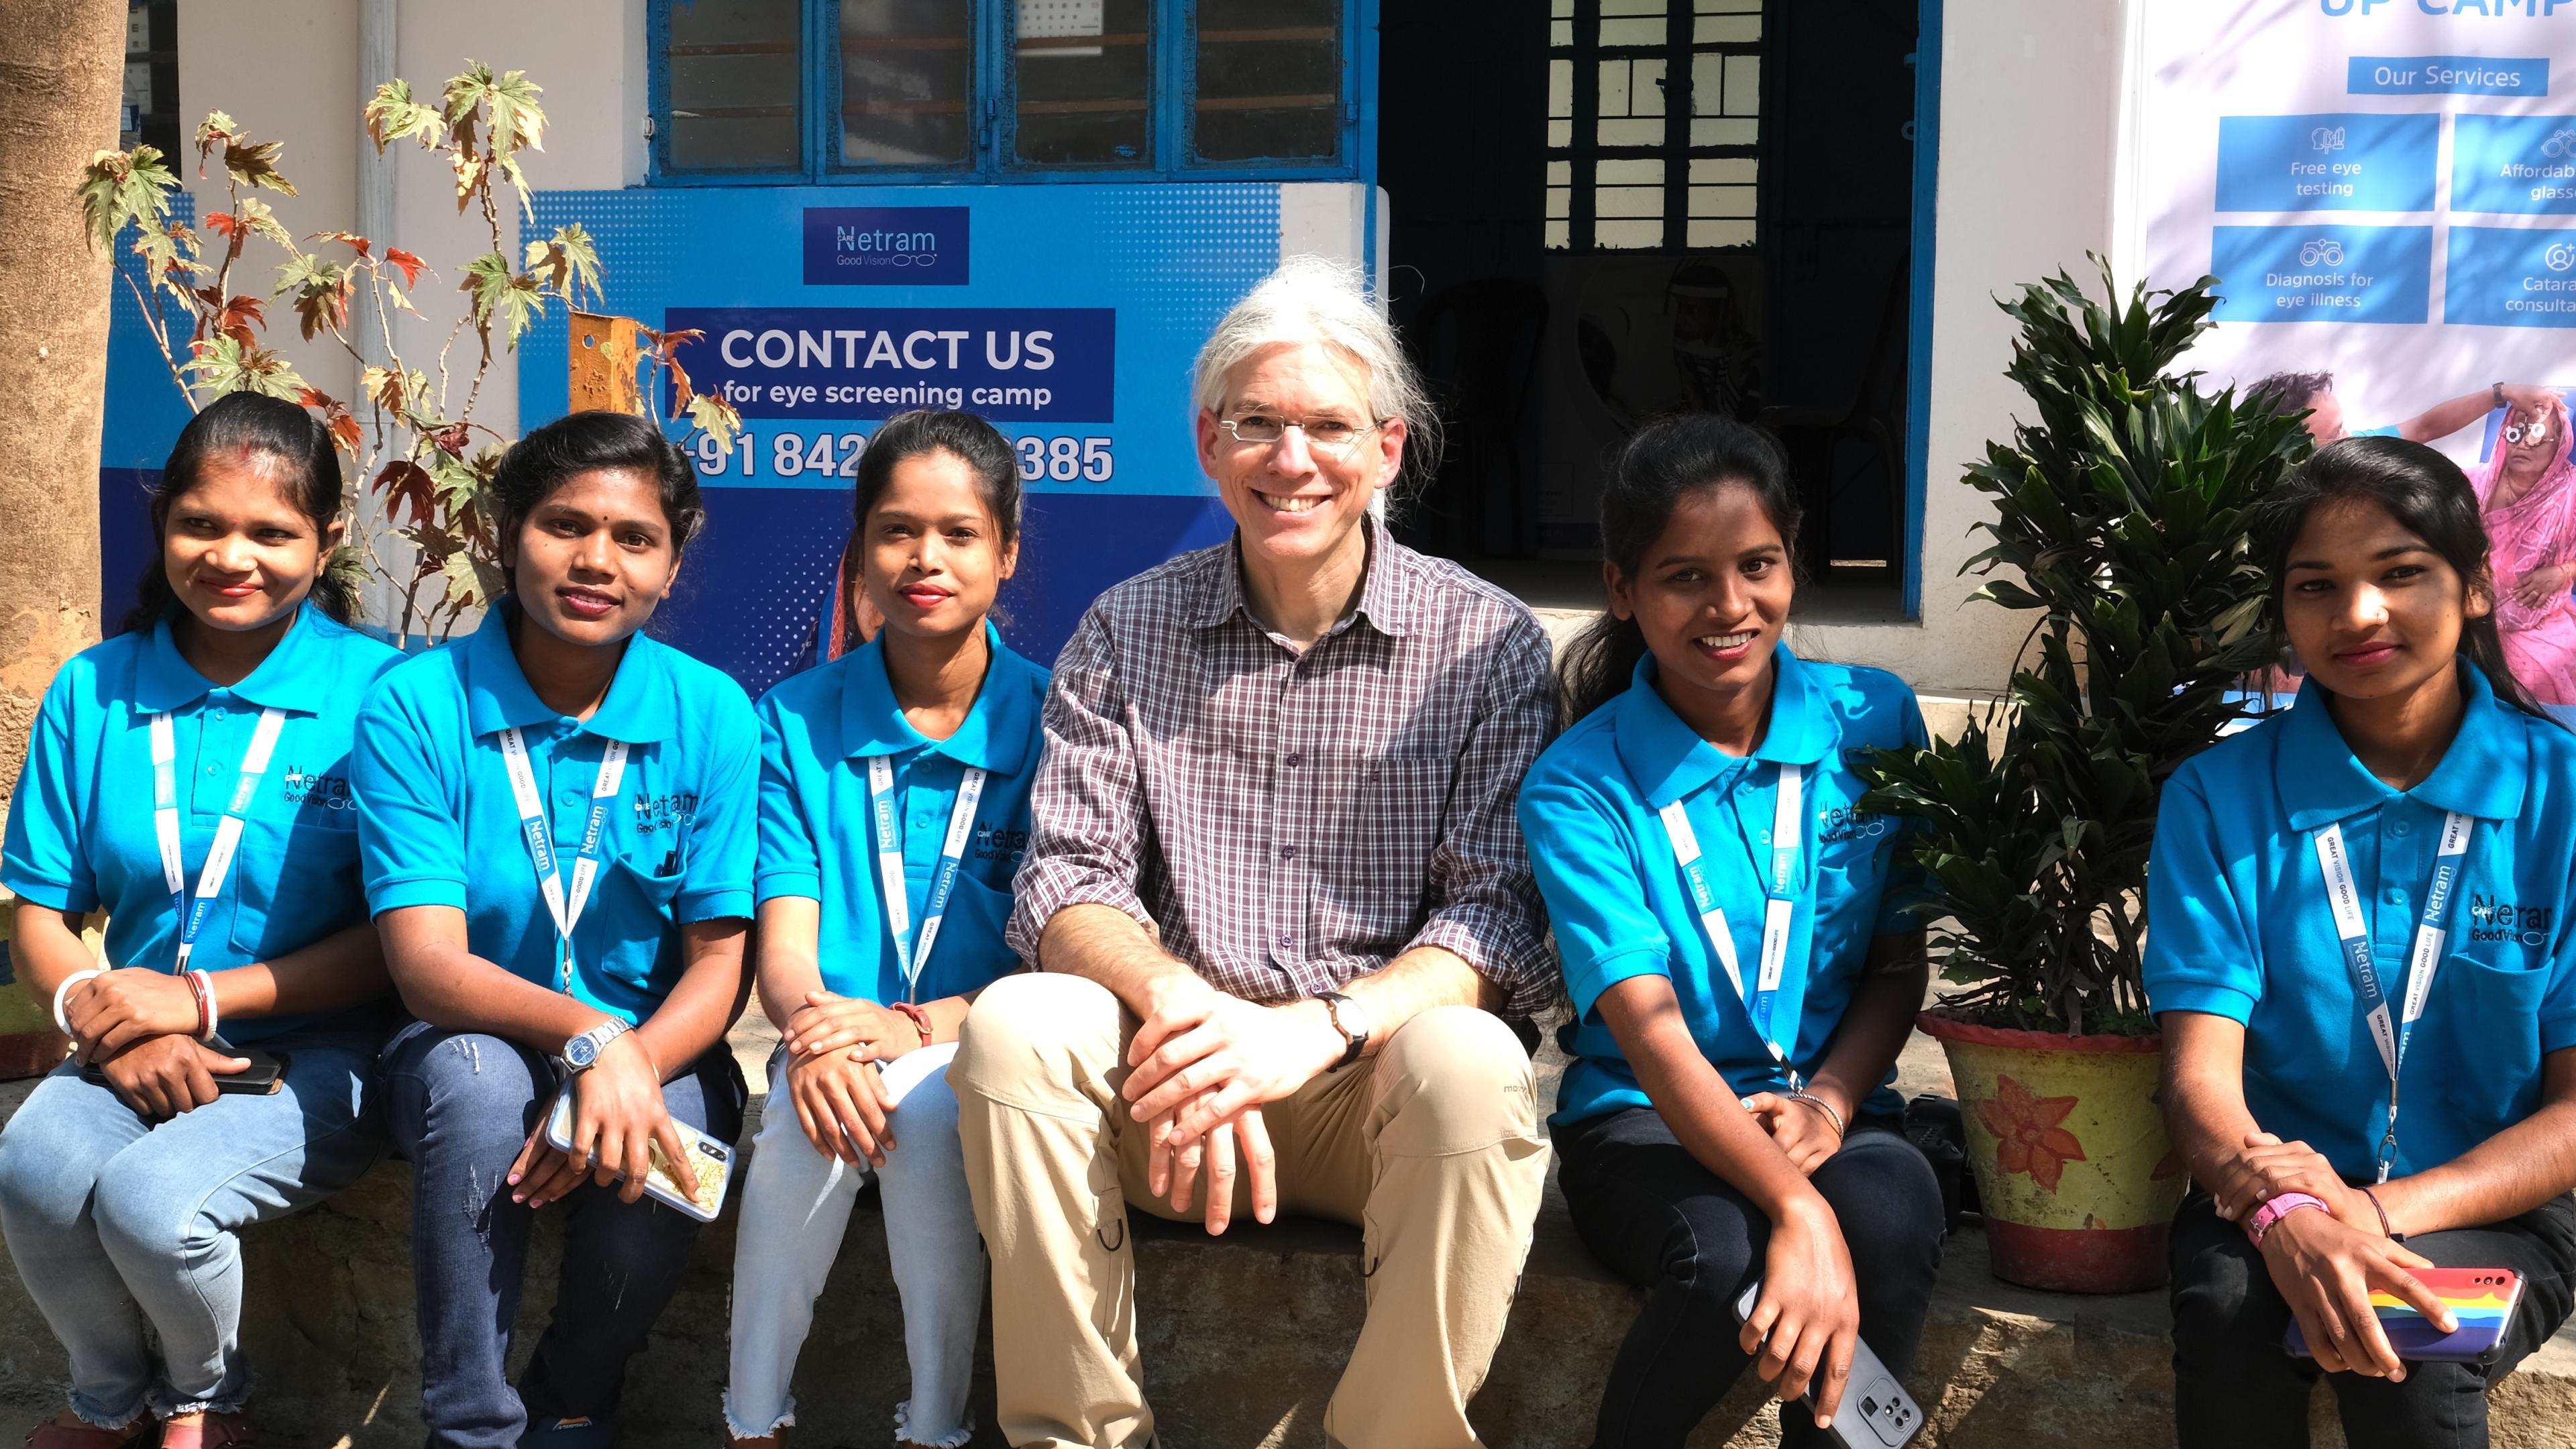 Martin Aufmuth surrounded by young Care Netram employees in India